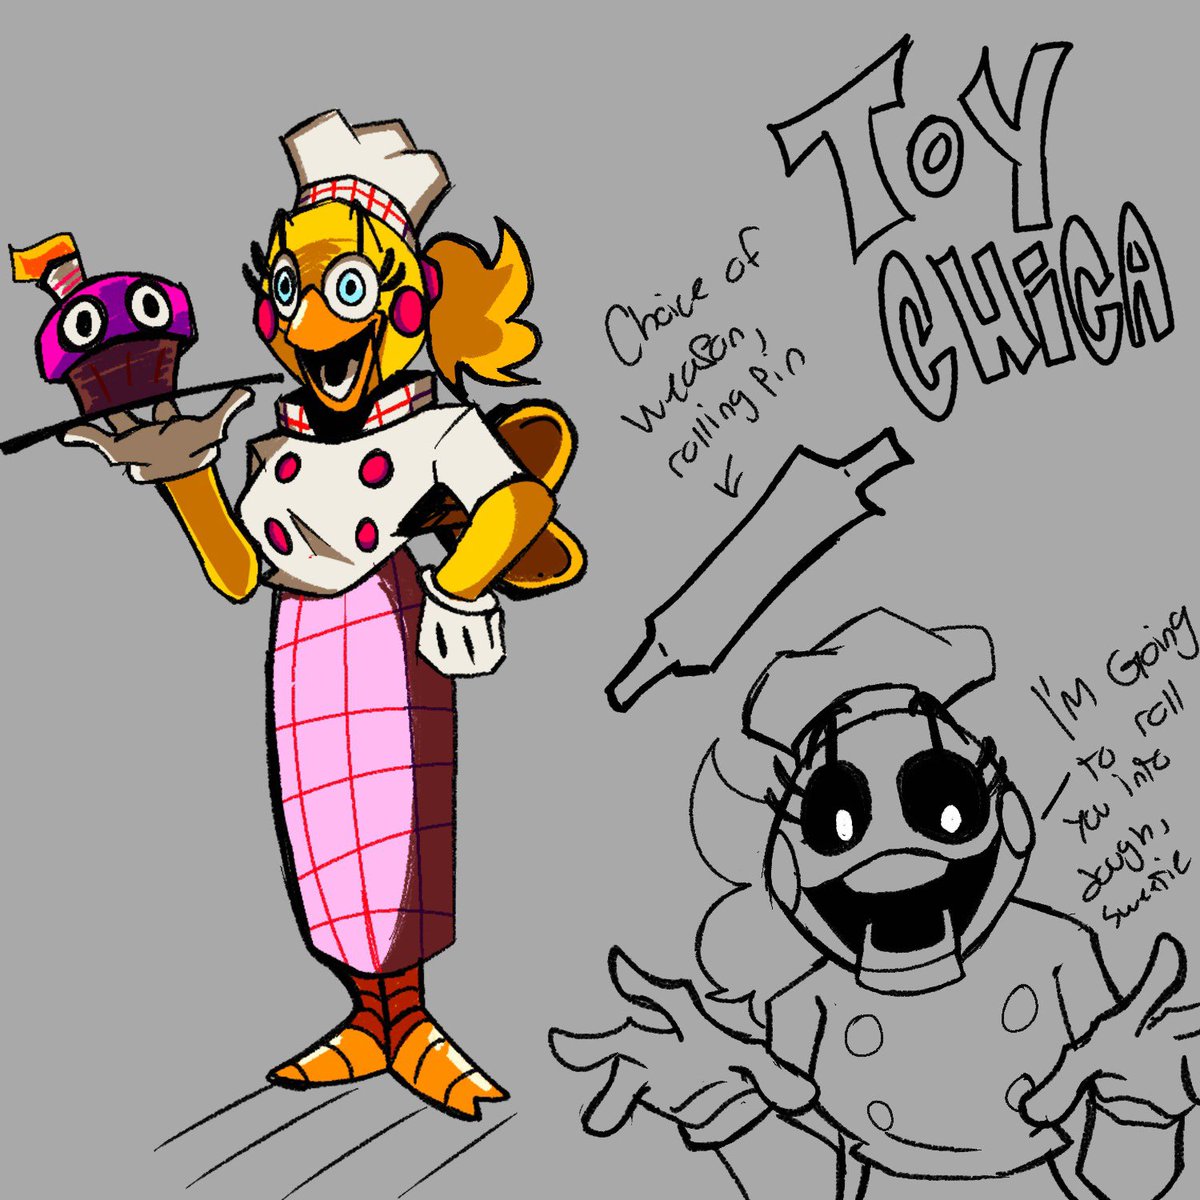 Meet the baker, toy Chica (I kinda rushed  this but it looks alright) #FNAF #FNAF2 #ToyChica #fnaffanart